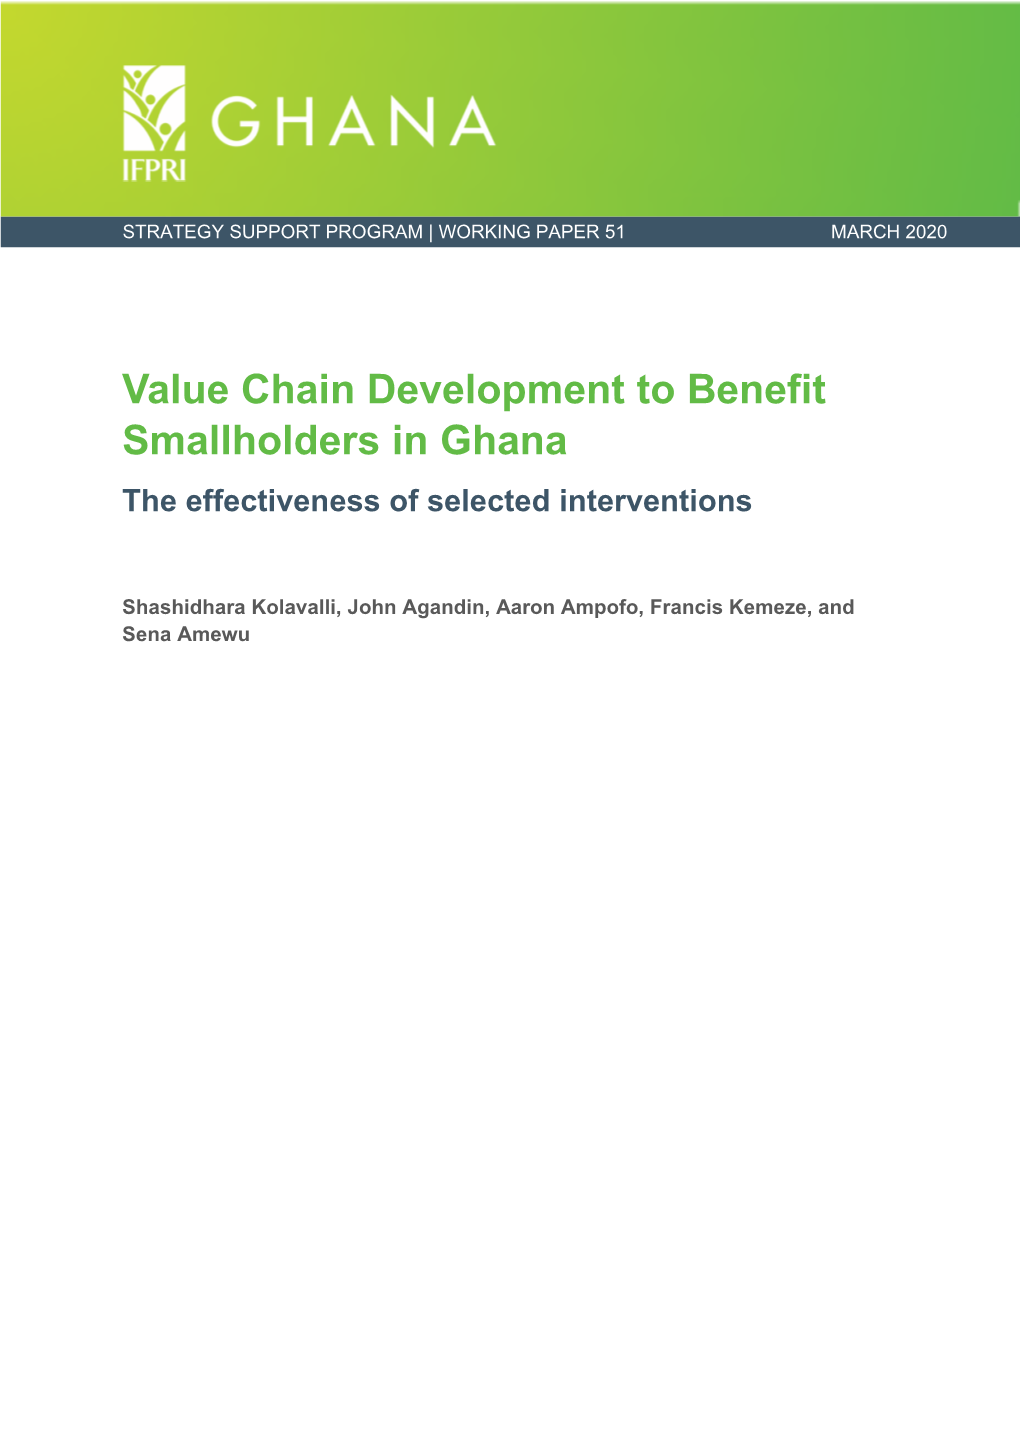 Value Chain Development to Benefit Smallholders in Ghana the Effectiveness of Selected Interventions